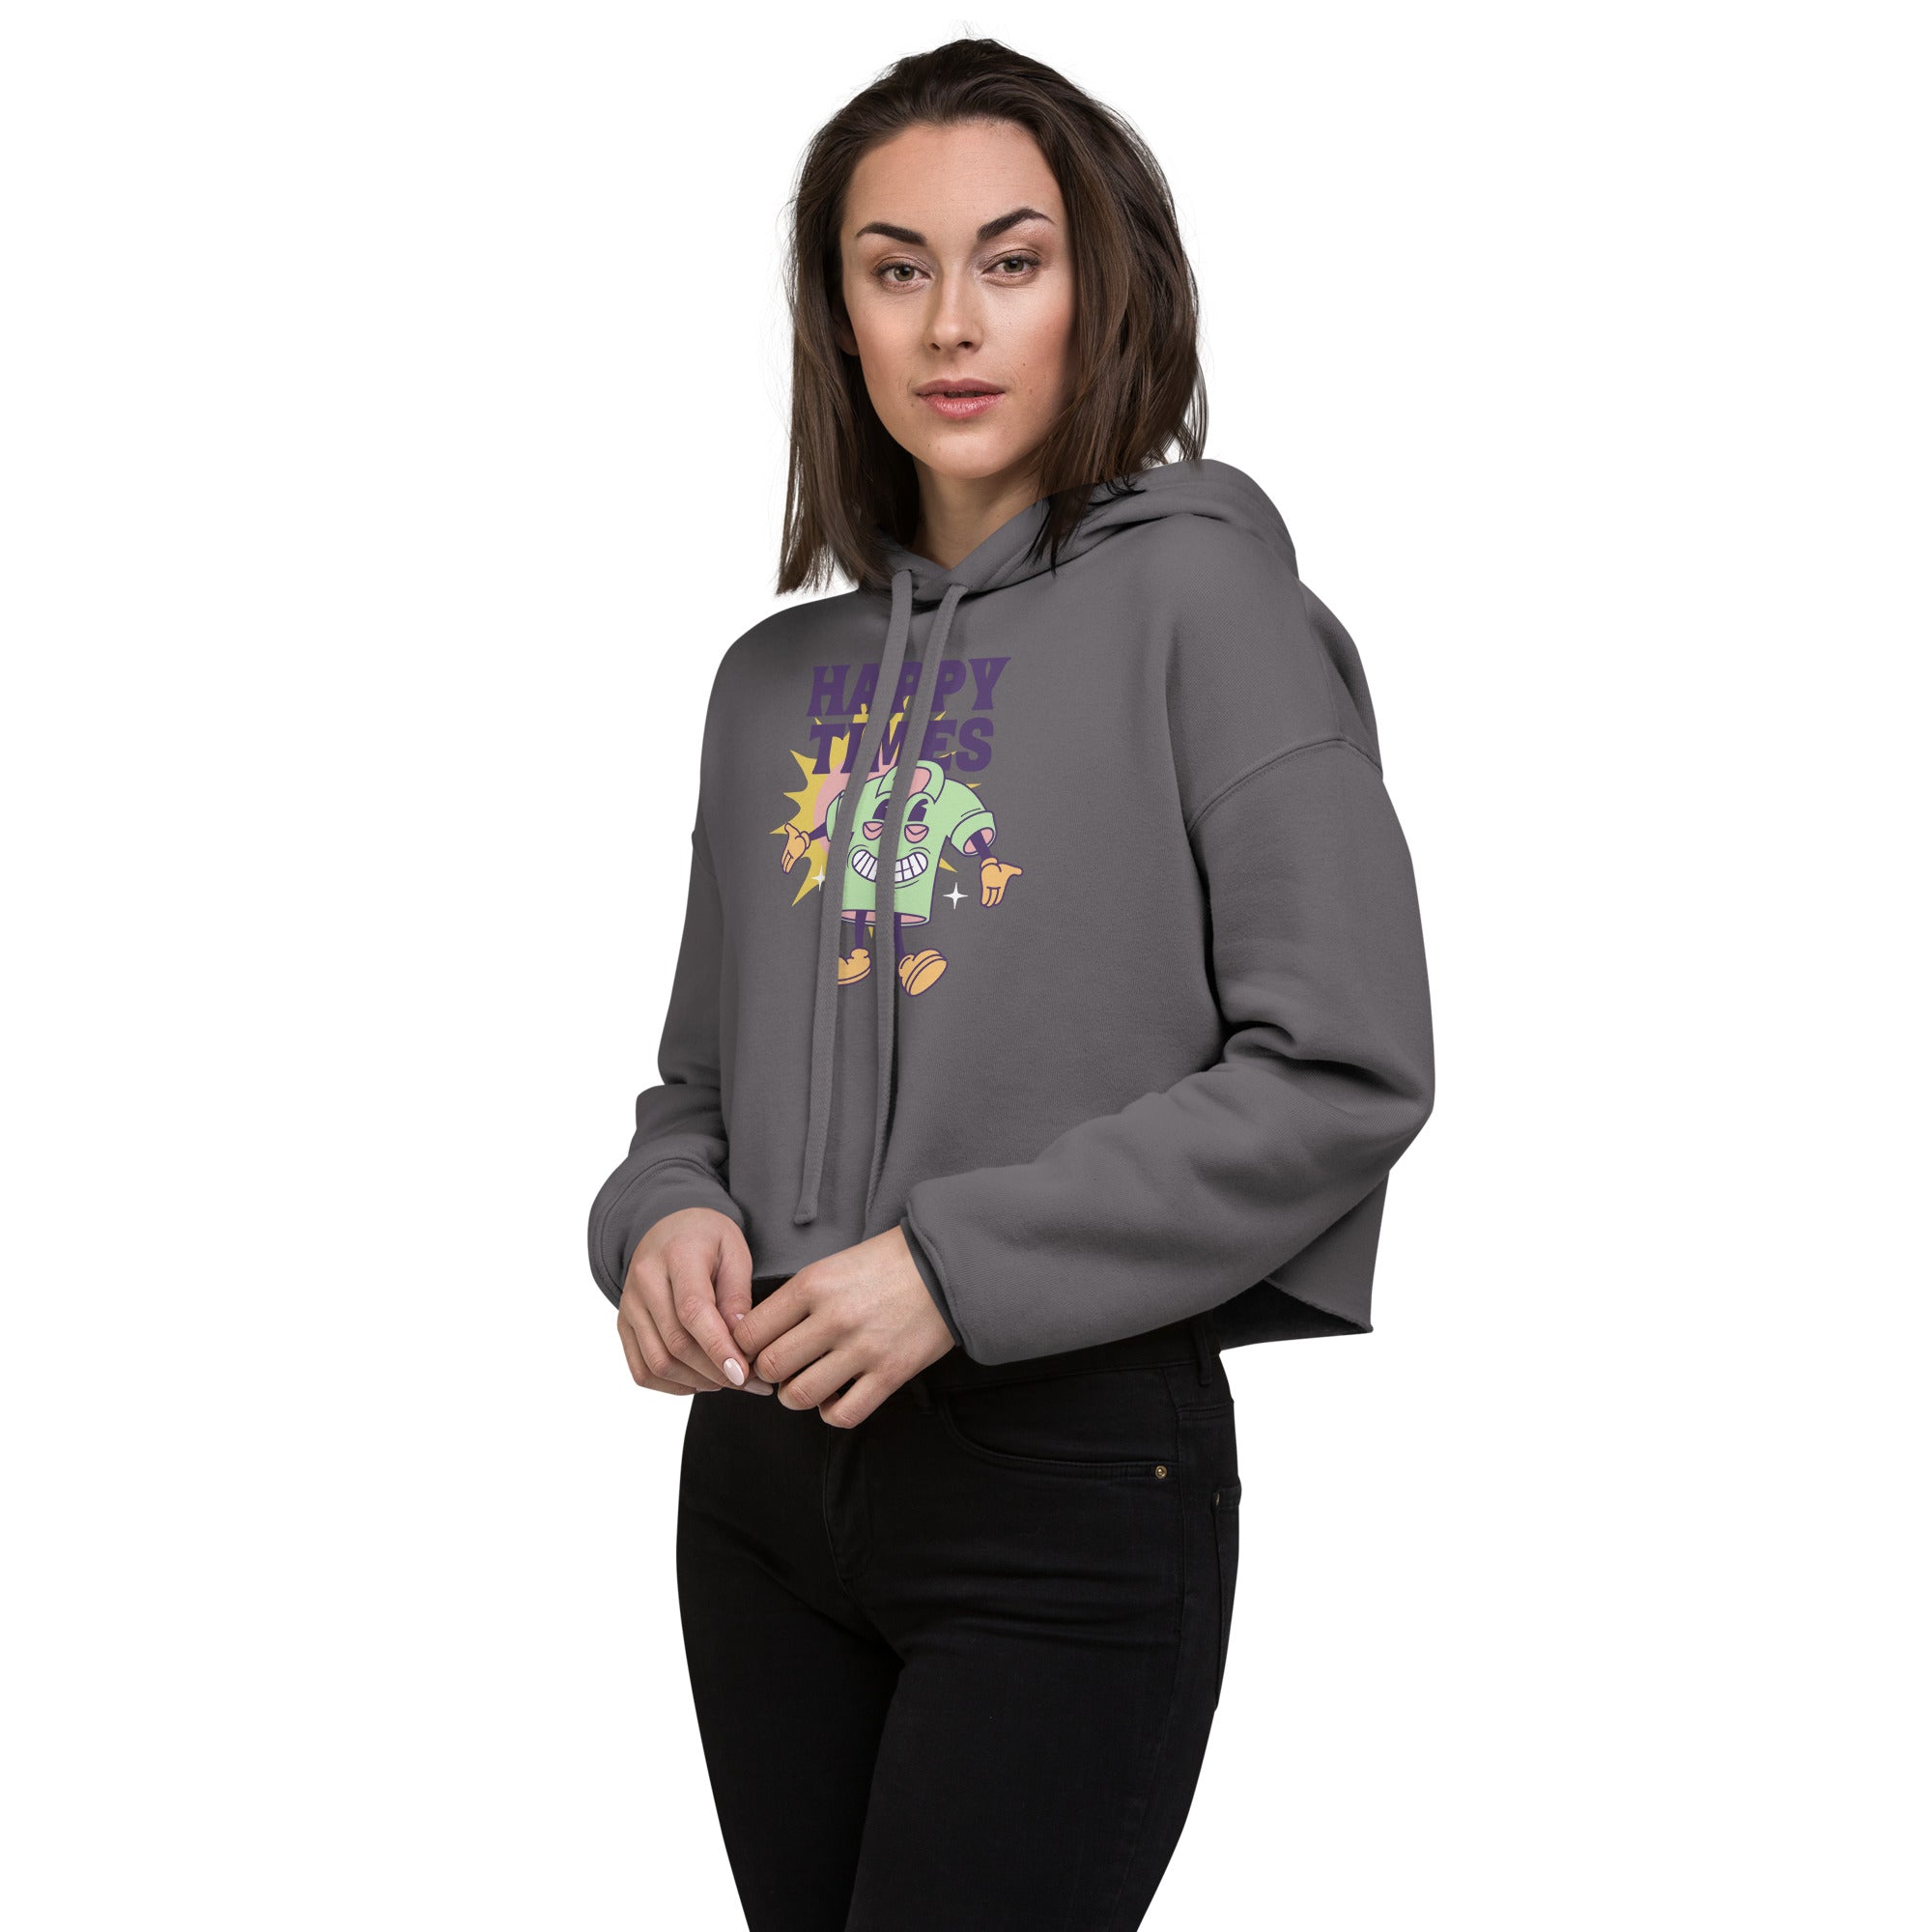 SORTYGO - Happy Times Cropped Hoodie in Storm